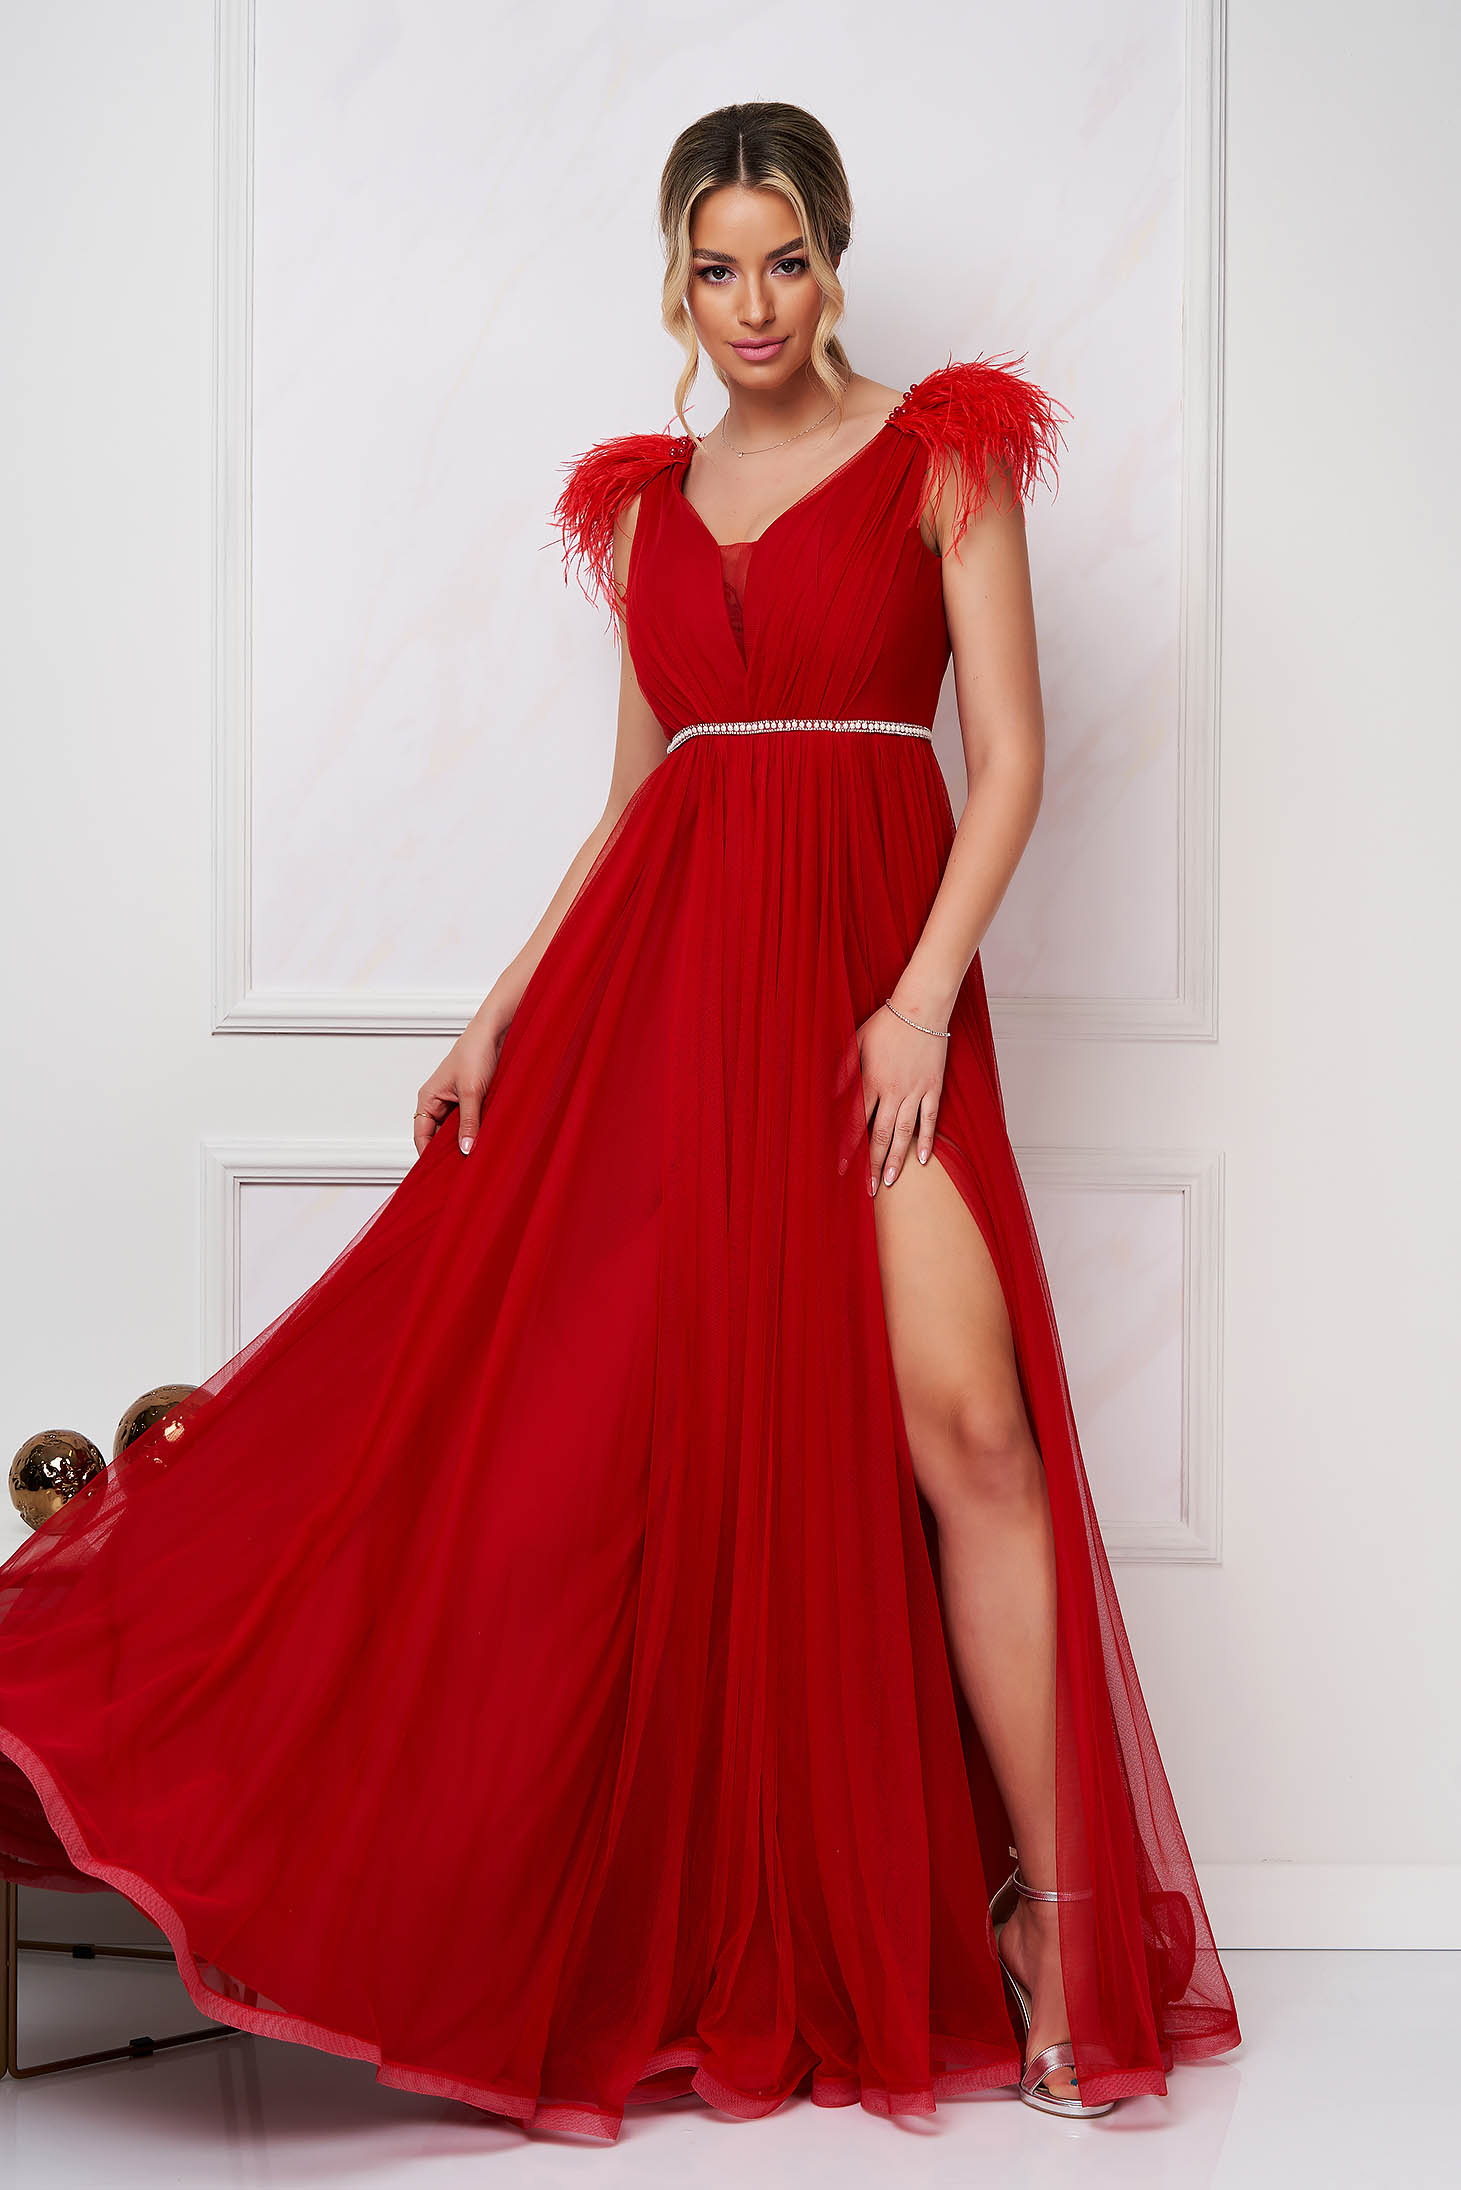 Long cloche from tulle with embellished accessories feather details red dress